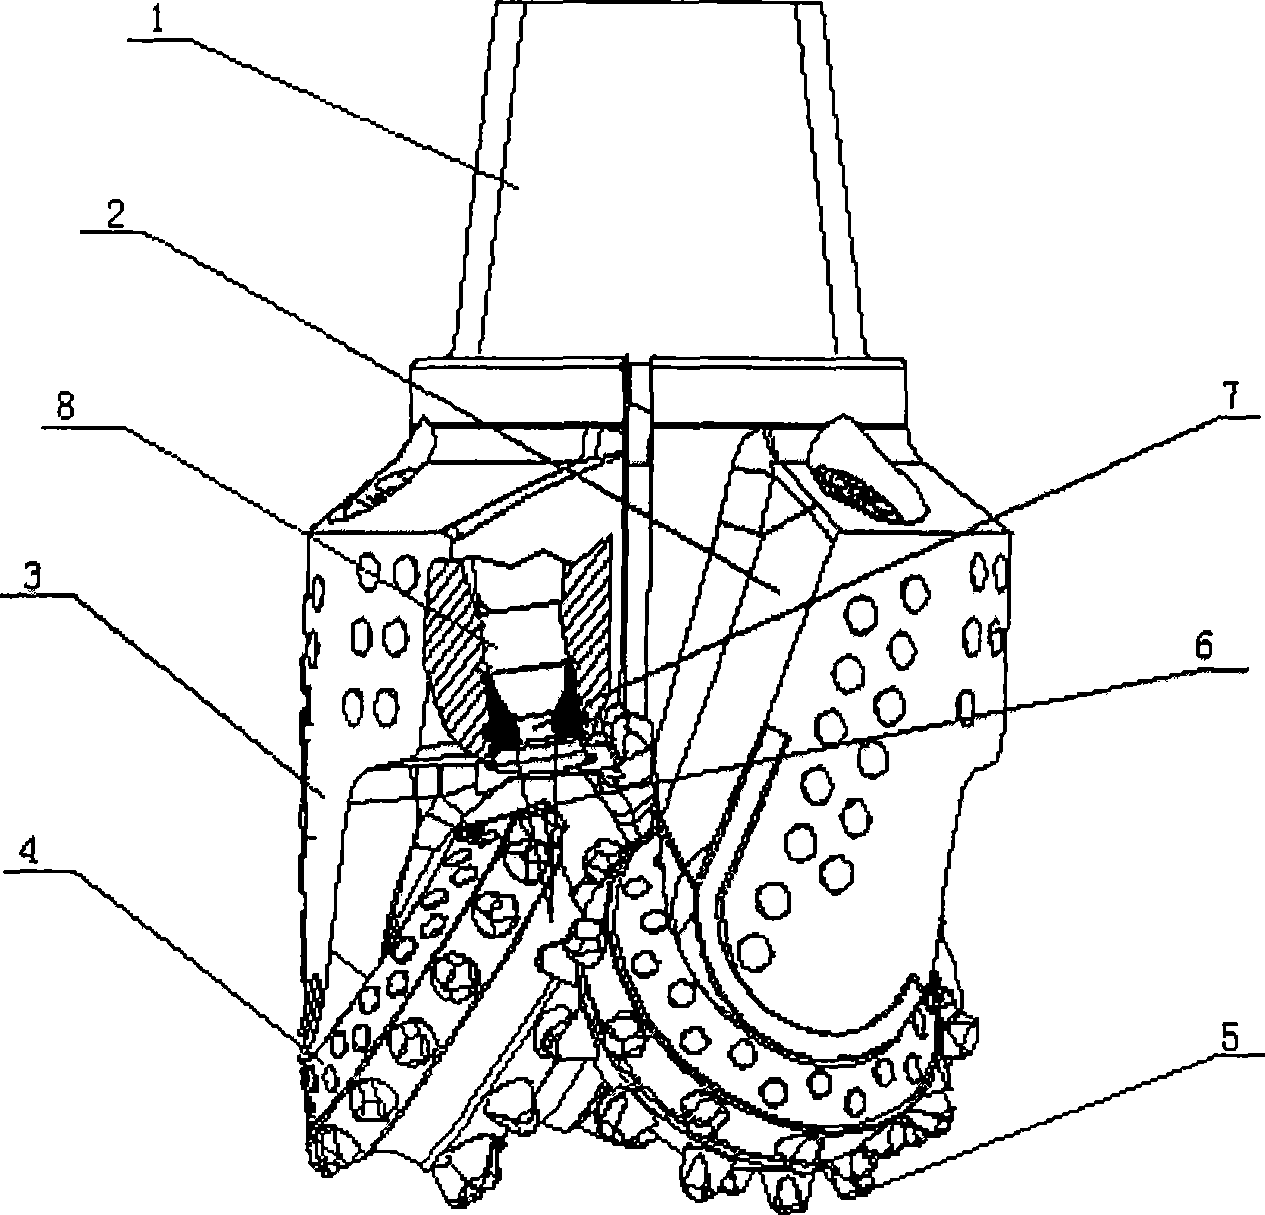 Three-cone bit for horizontal well and hard formation well